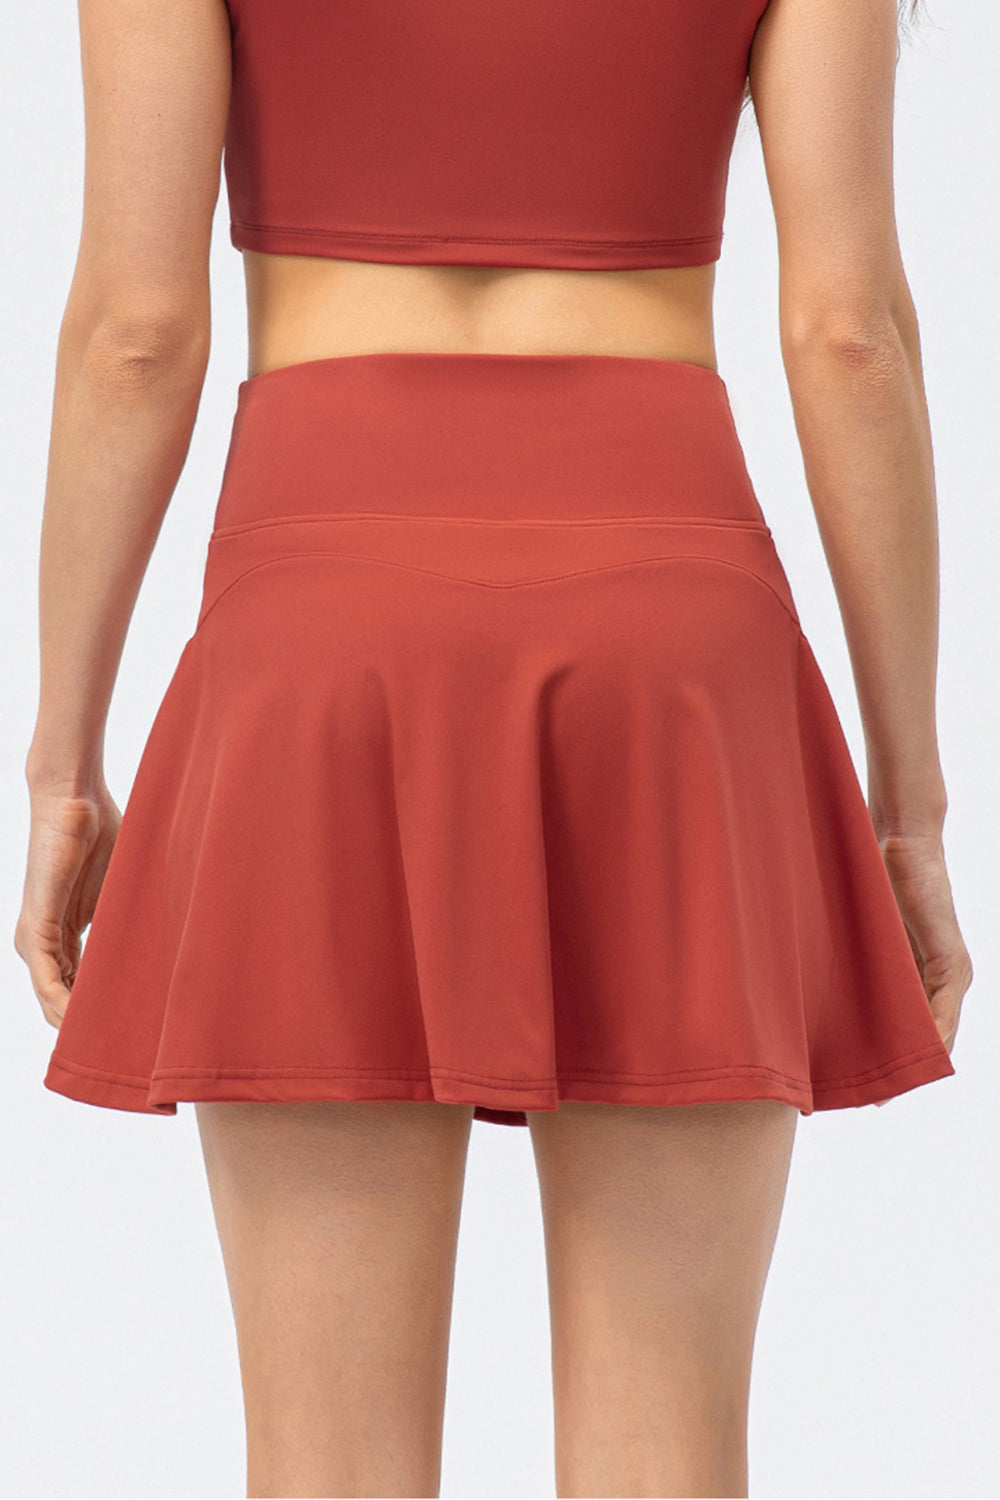 High Waist Wide Waistband Active Skort Dress in Multiple Colors Southern Soul Collectives